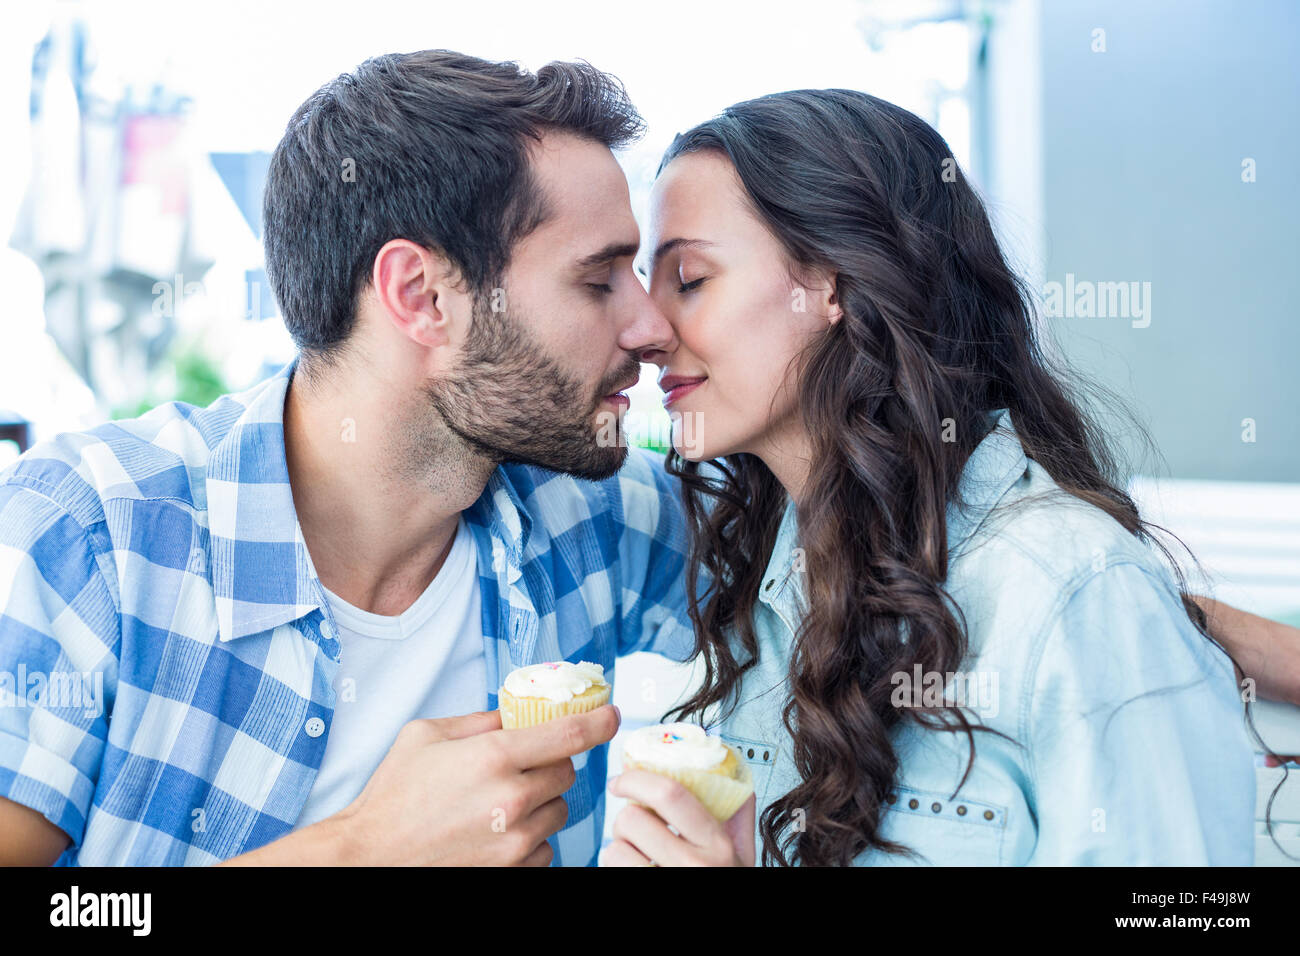 Couple kissing while holding cupcakes Stock Photo